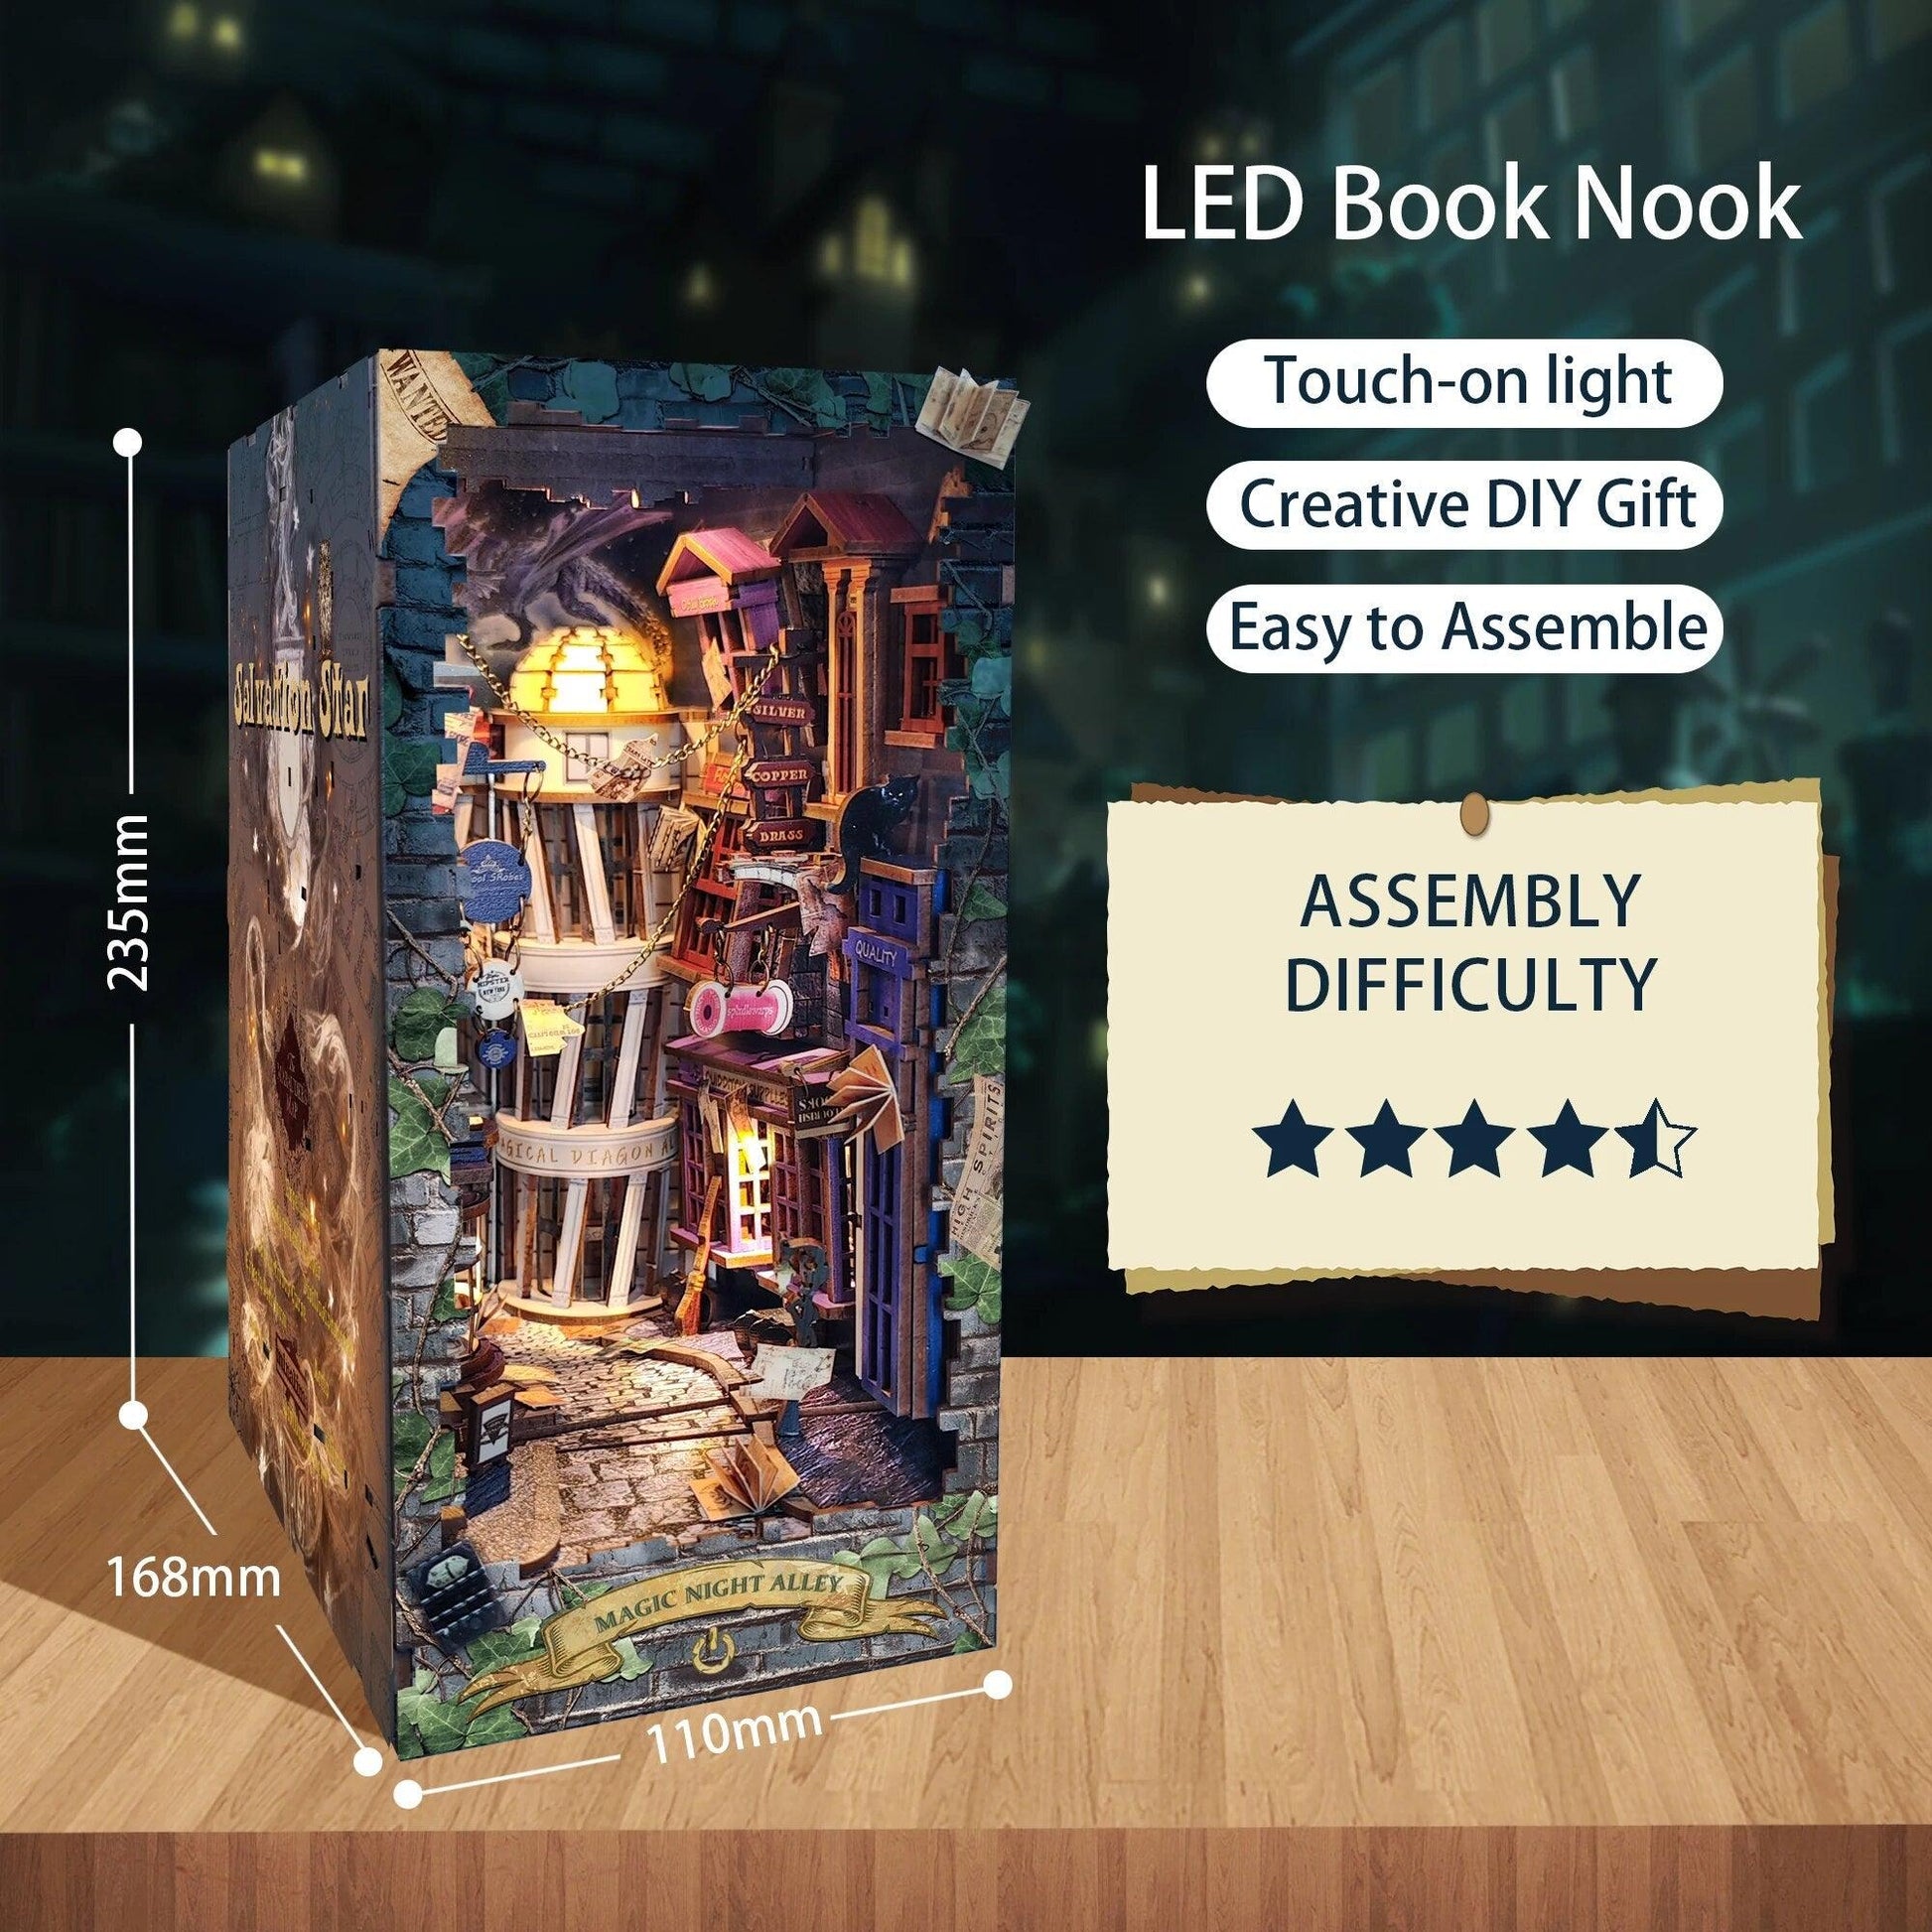 DIY Magic Night Alley Book Nook - DIY Book Nook Kits - Wizard Alley Book Nook Dioramas Book Shelf Insert Book Scenery with LED Model Building Kit - Rajbharti Crafts